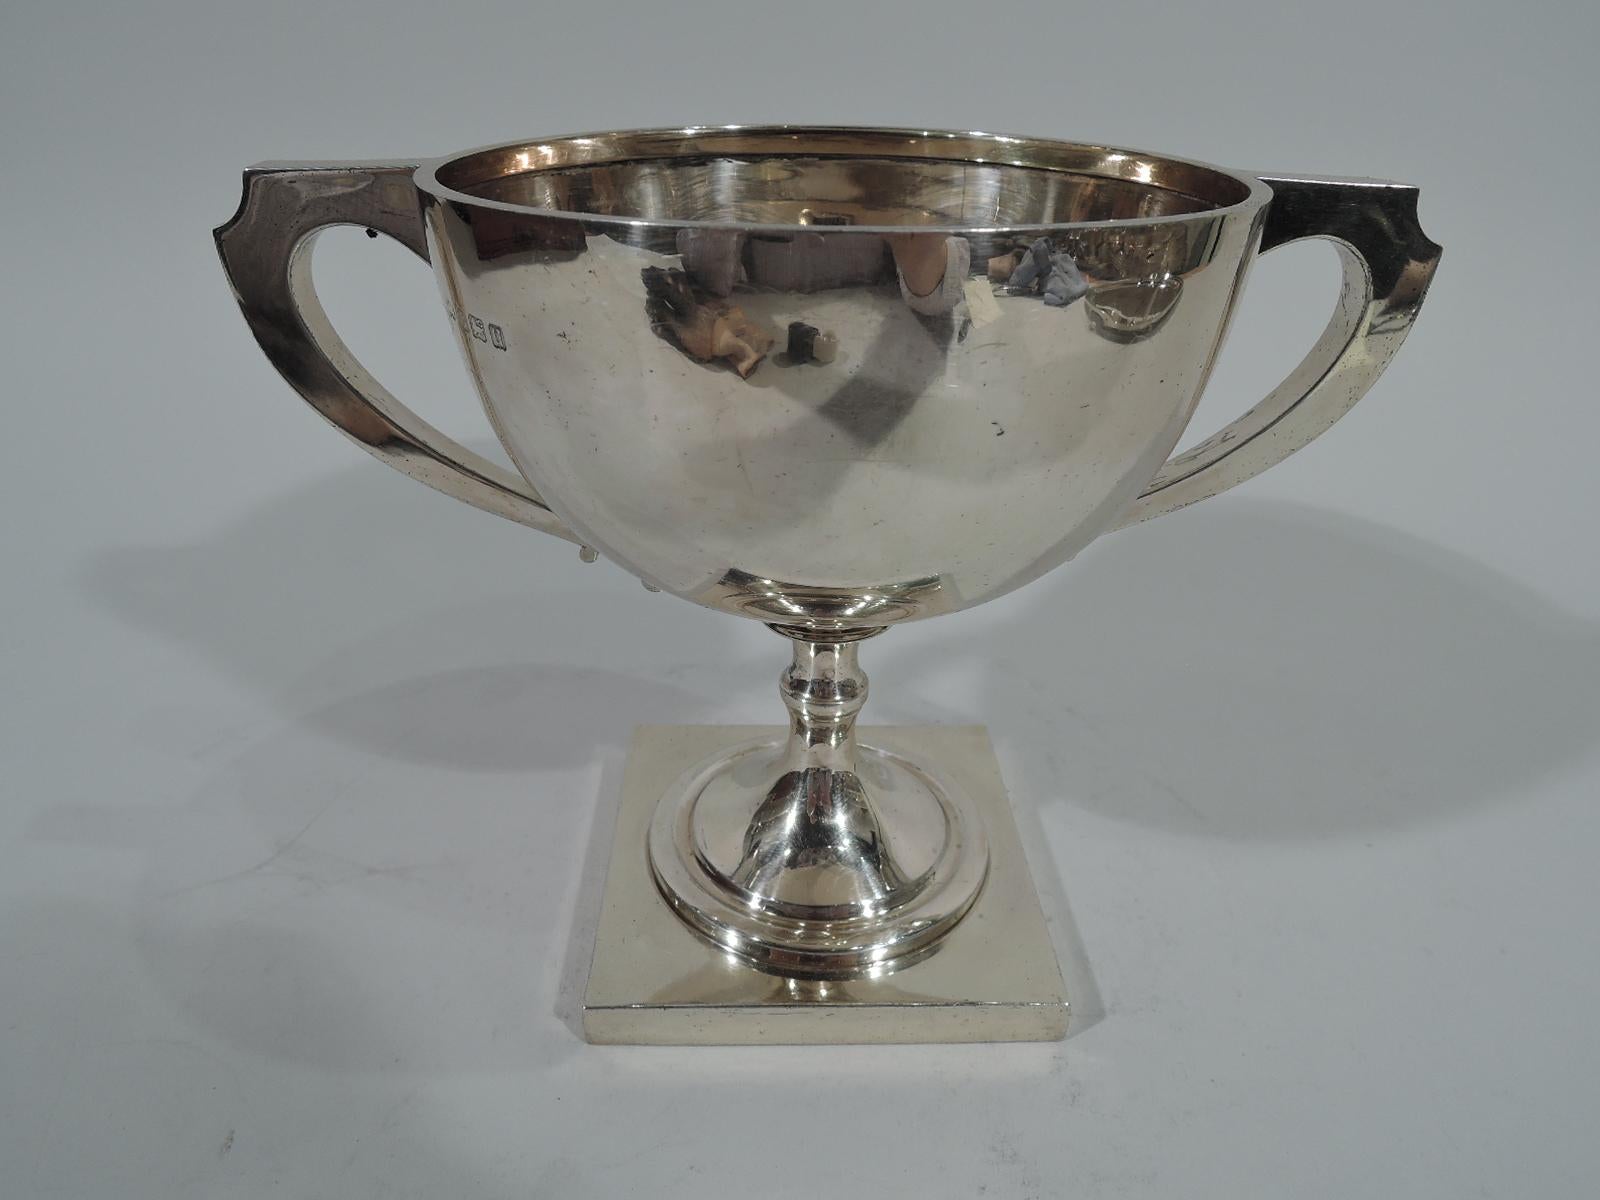 Duke of Windsor Association: A sterling silver trophy cup that he won for the light-weight Hog Hunters race at the Kadir Meeting, which took place at the end of his Indian tour in 1922. At the time Edward was Prince of Wales, a young man of dash and